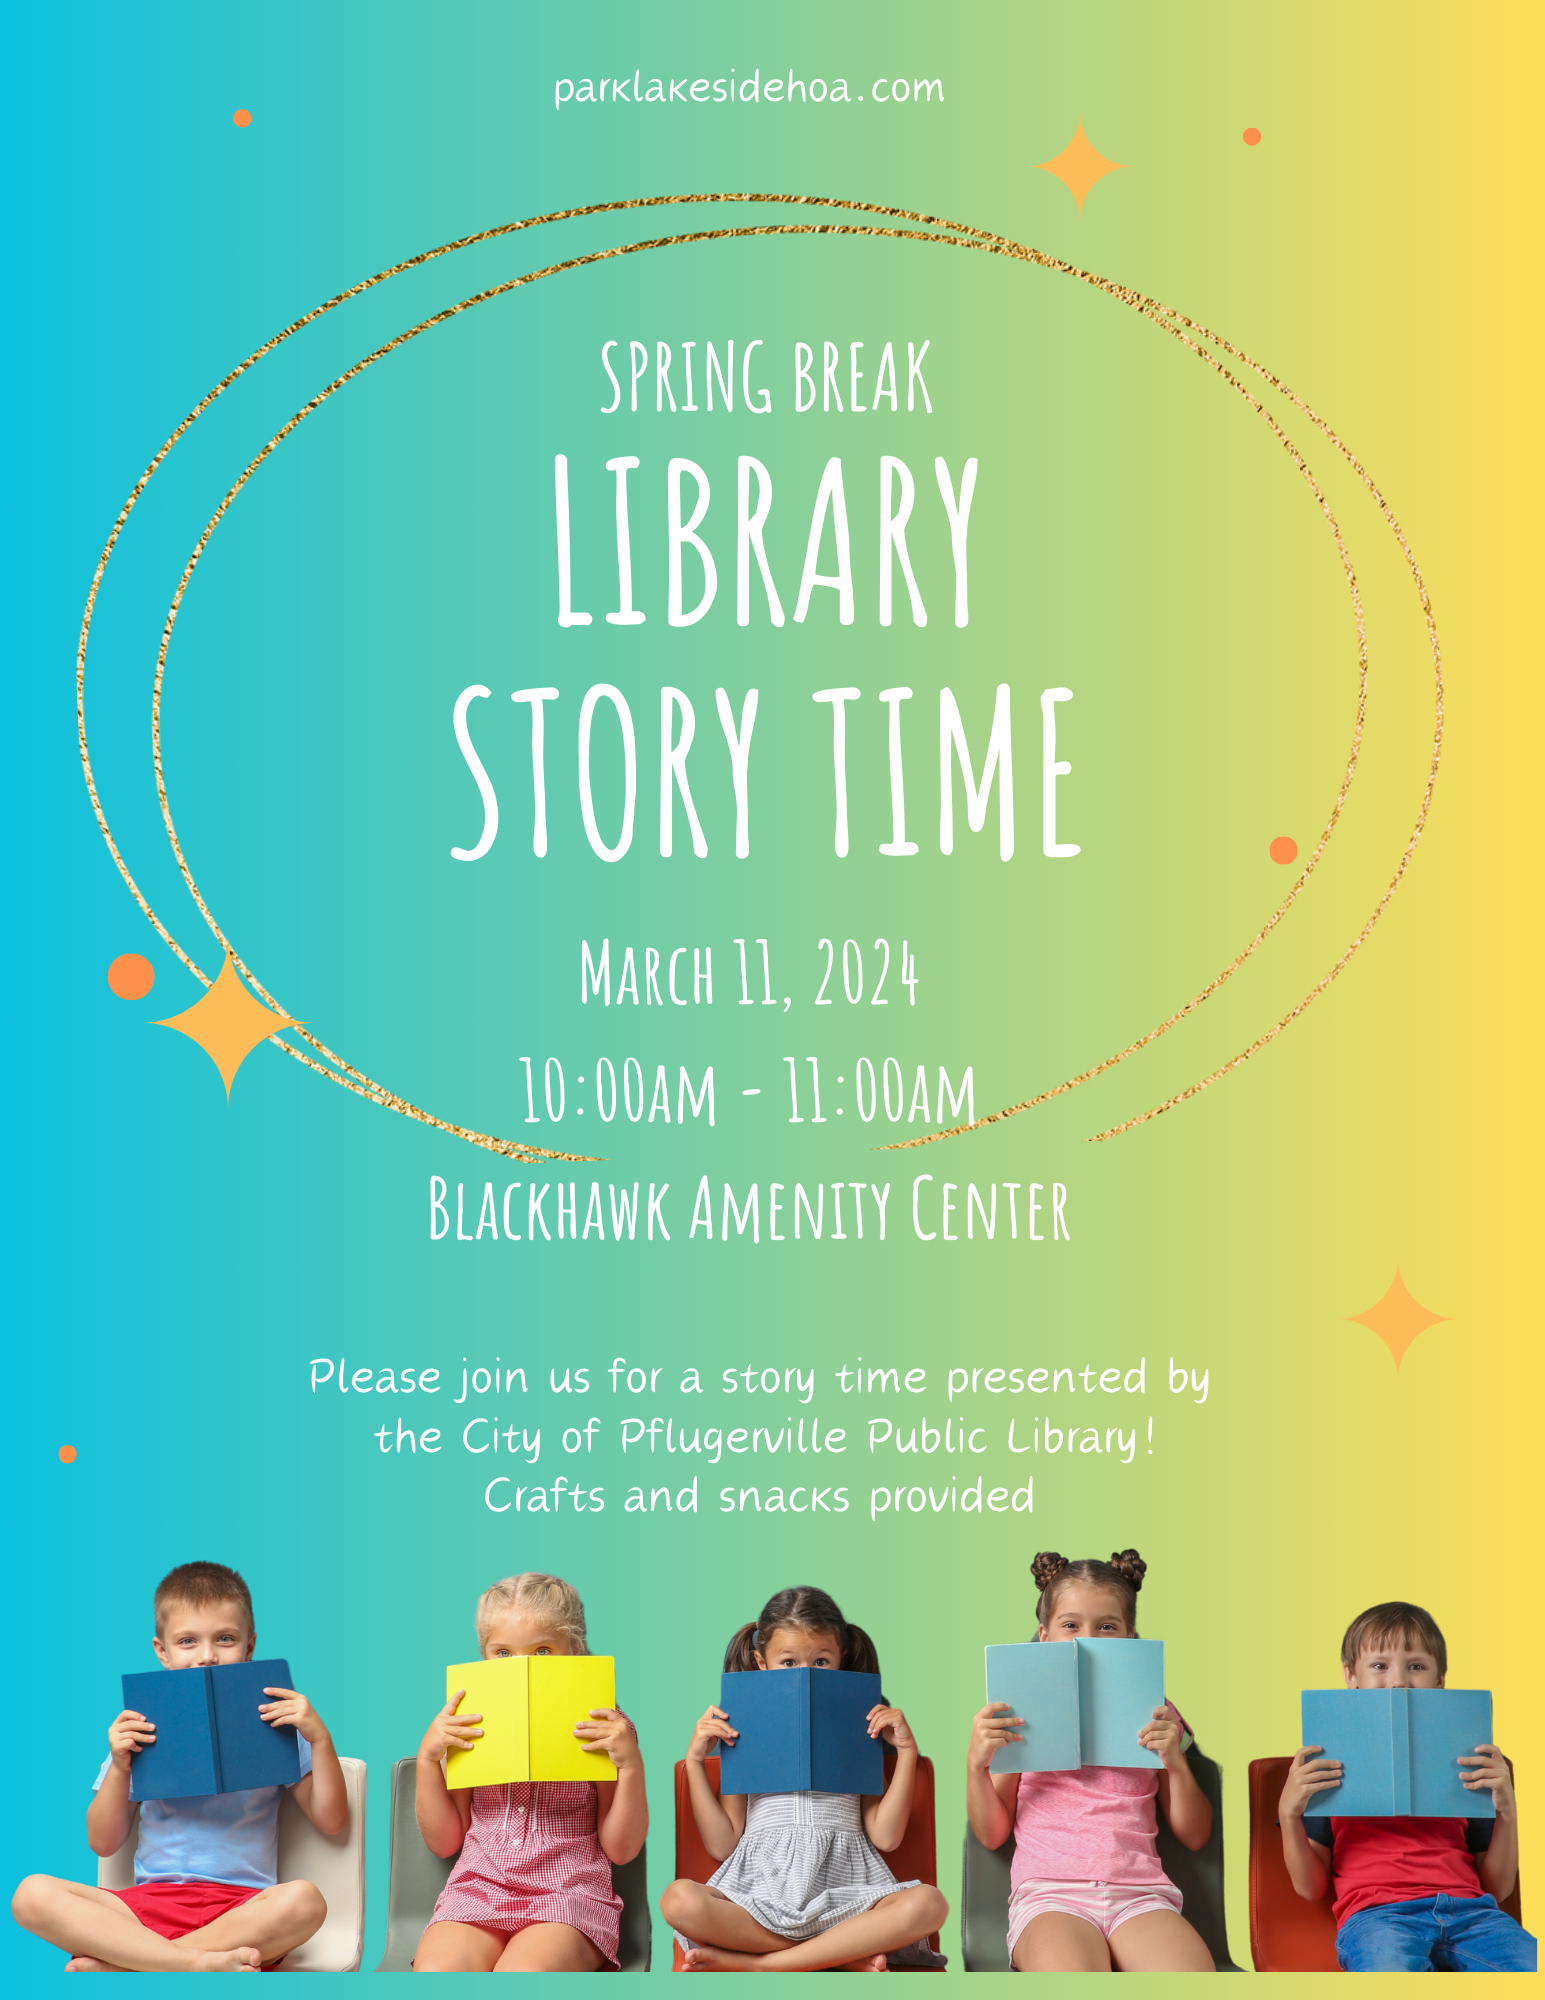 Colorful flyer for Spring Break Library Story Time on March 11, 2024, from 10:00 am to 11:00 am at Blackhawk Amenity Center. It features an image of four children sitting in a row, each holding a book in front of their face, with a teal to yellow gradient background. The event is presented by the City of Pflugerville Public Library, with crafts and snacks provided. The website parklakesidehoa.com is displayed at the top.